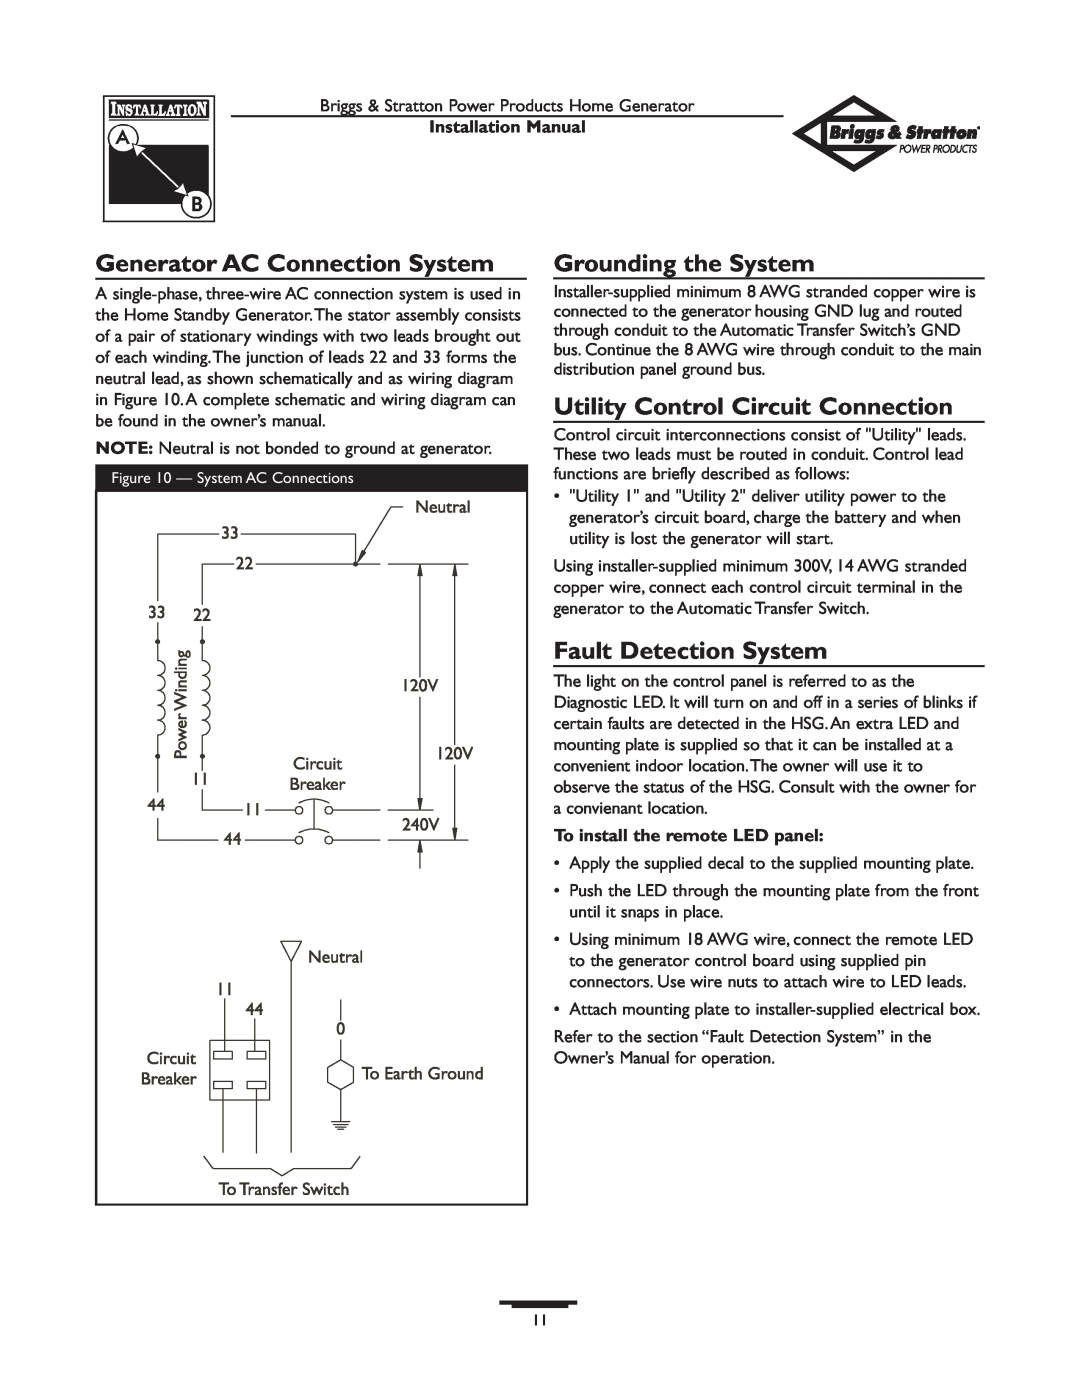 Briggs & Stratton 01938-0 manual Generator AC Connection System, Grounding the System, Utility Control Circuit Connection 